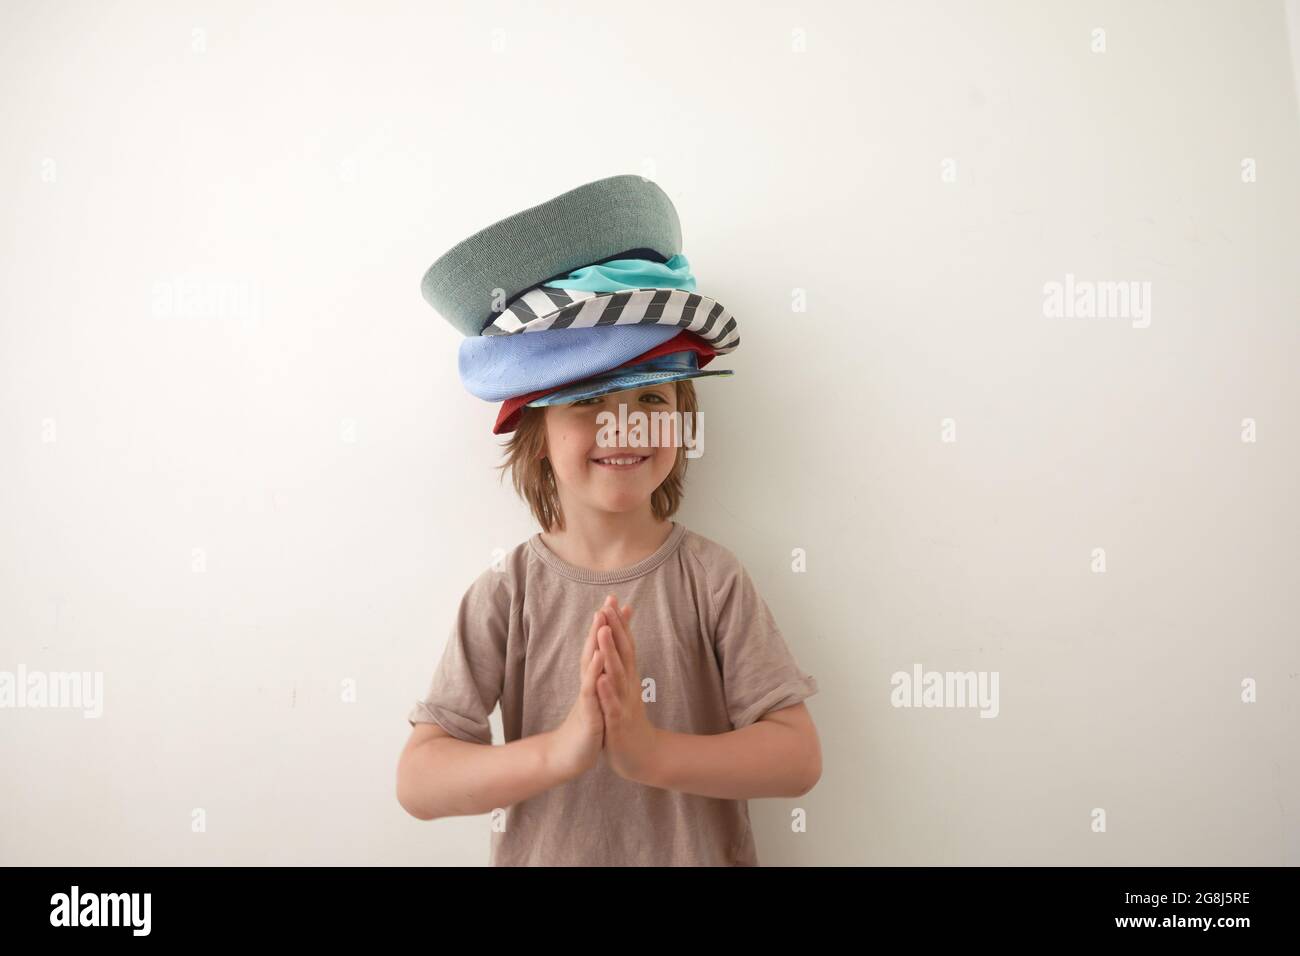 Smiling boy wearing t shirt and various headwear standing against white background and looking at camera. Child's palms are folded at the chest in gra Stock Photo